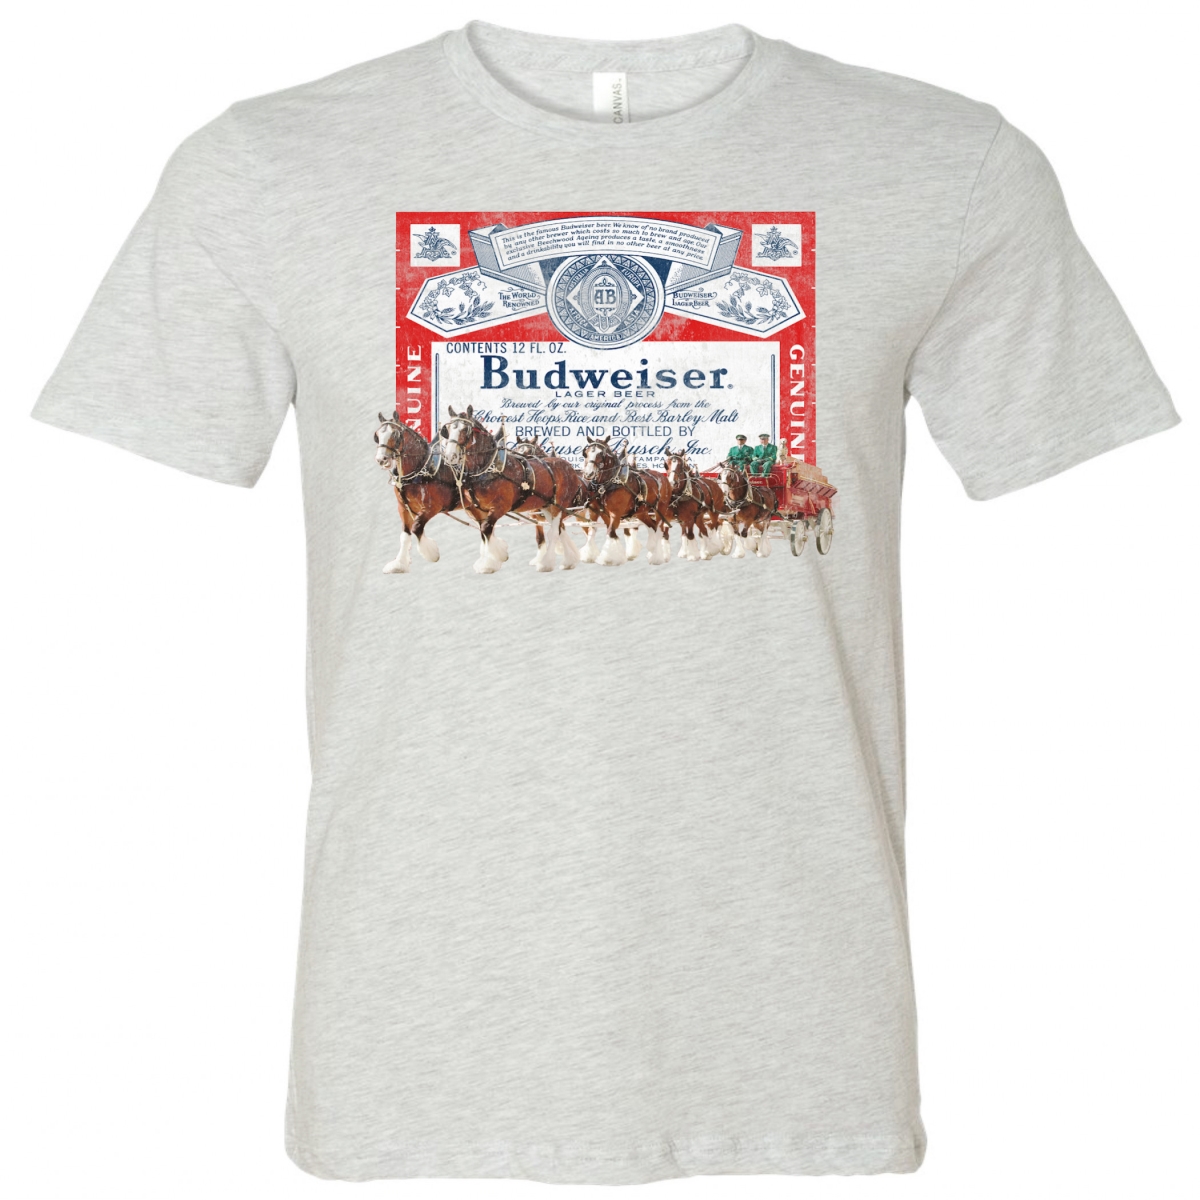 808283-xlarge  Clydesdale Logo T-Shirt - Extra Large -  Budweiser